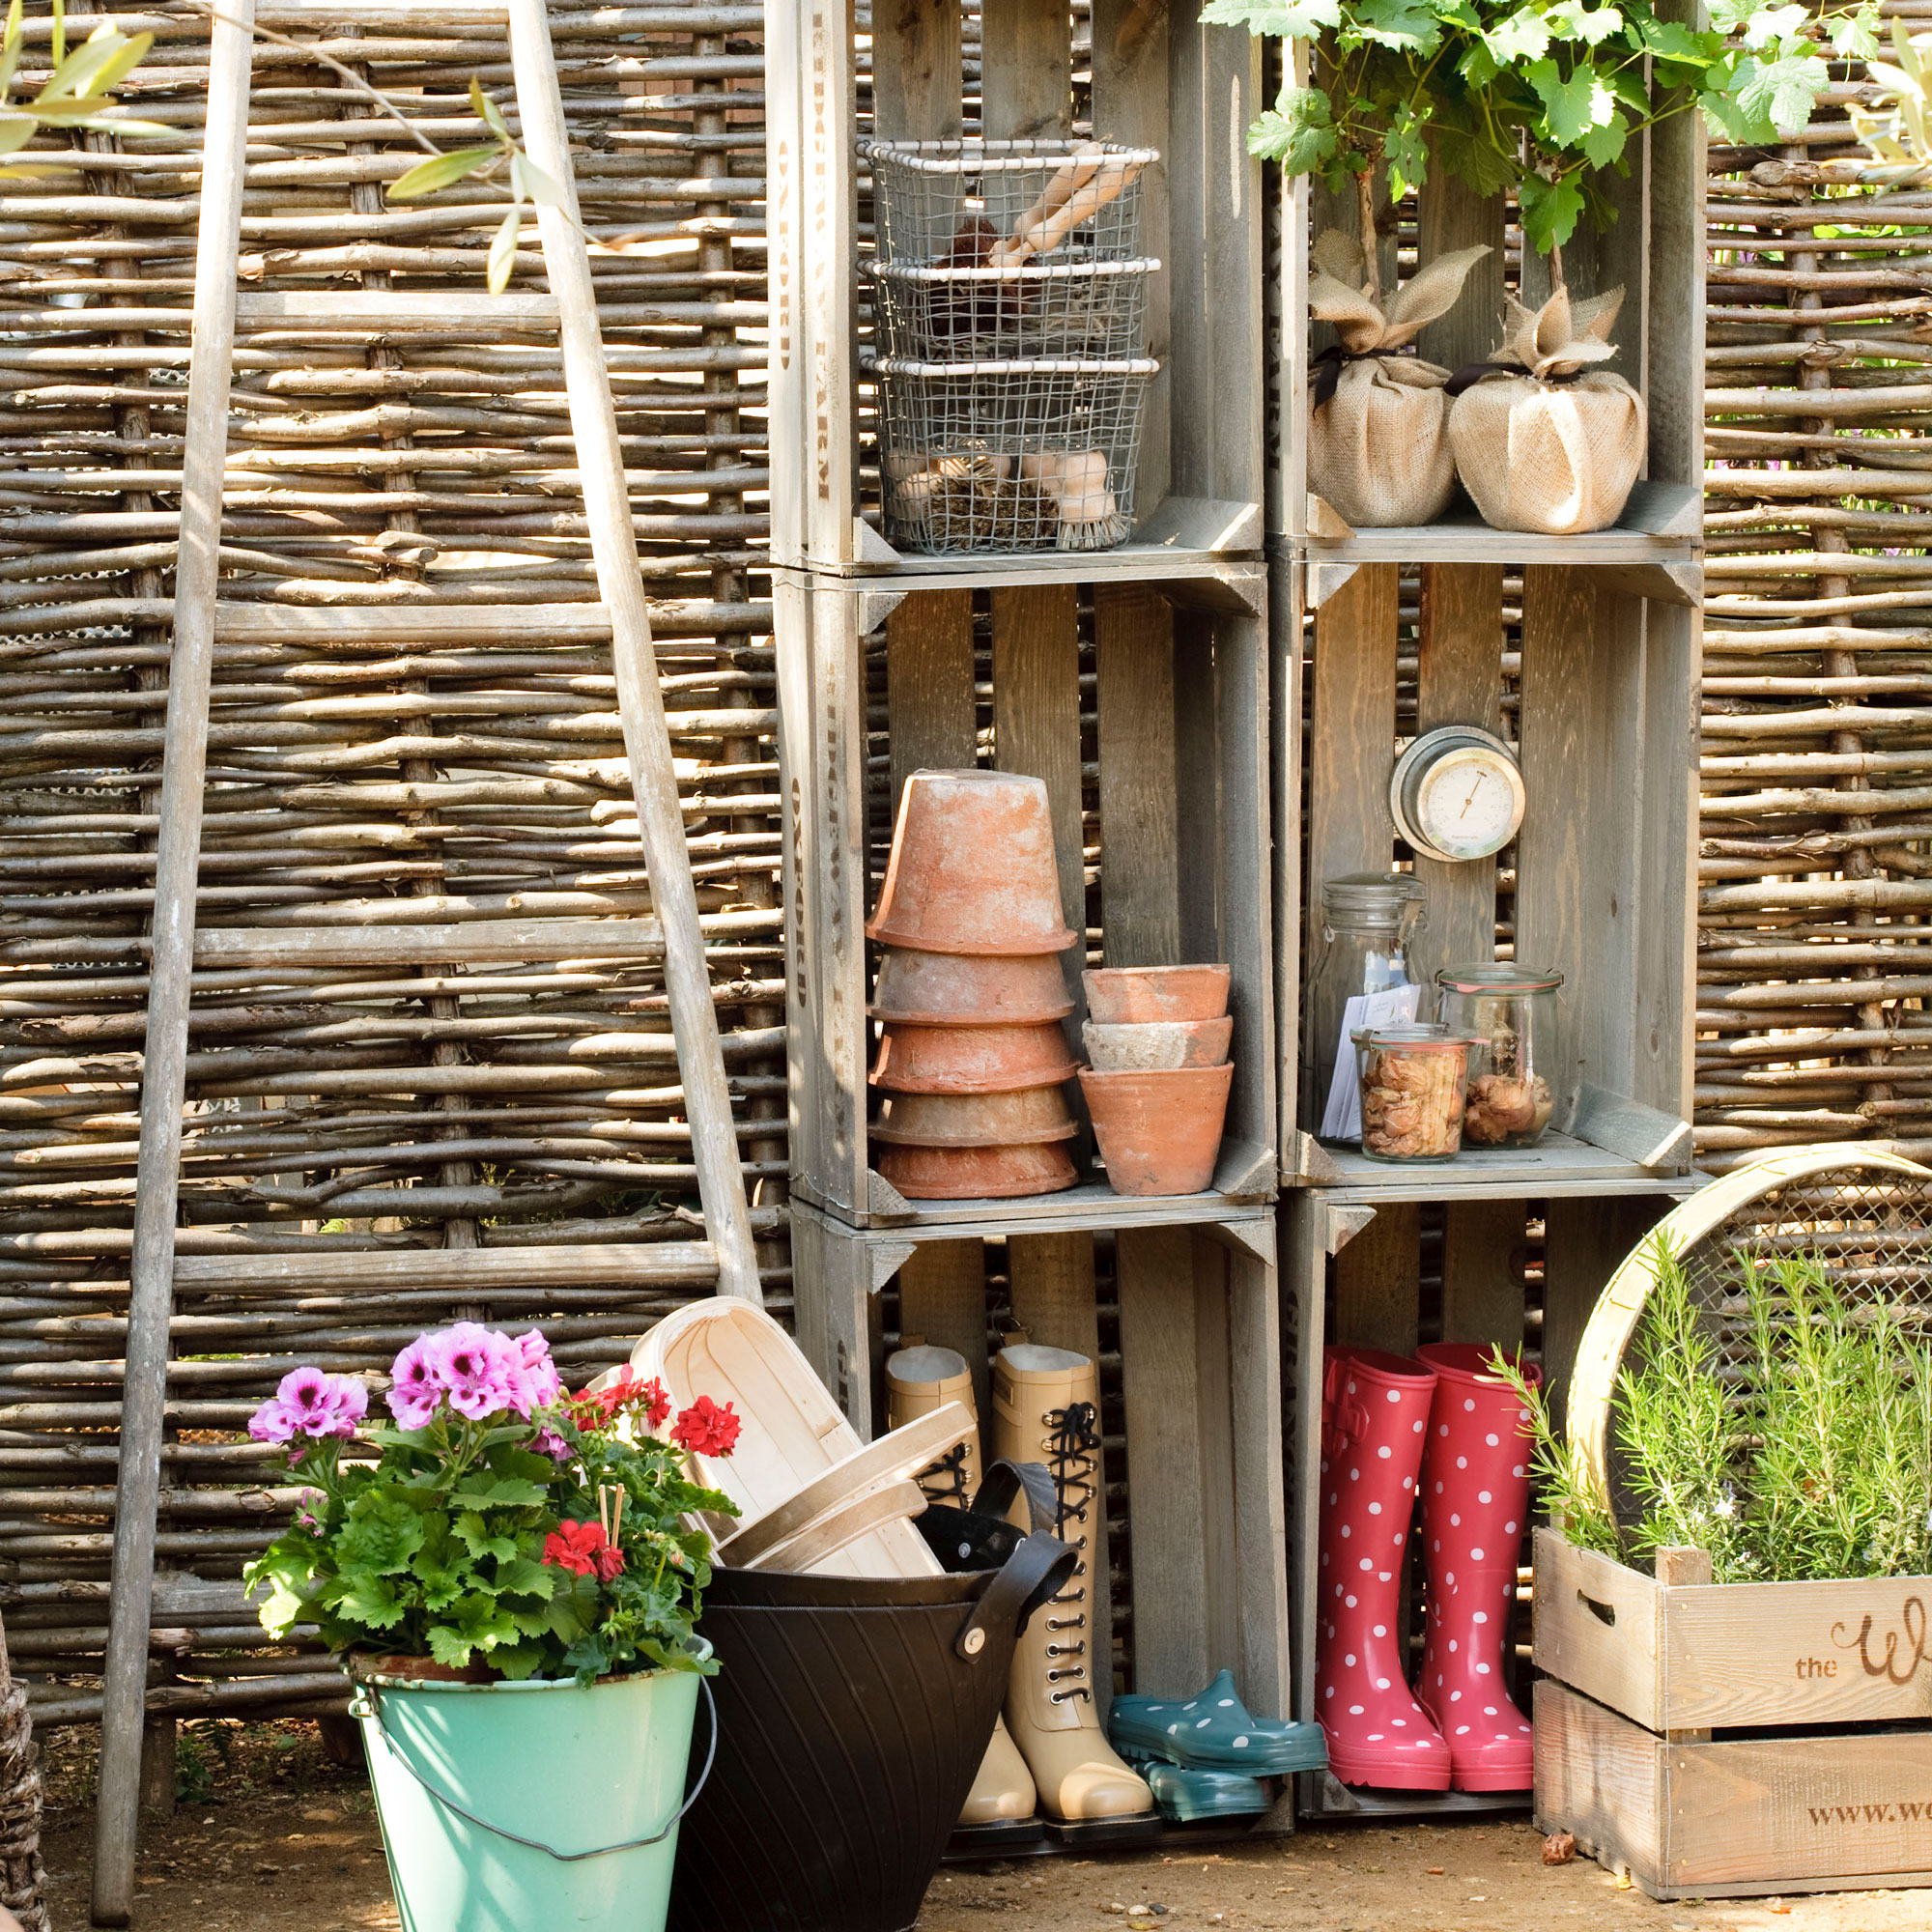 Transform Your Garden with The Best Seed Storage Containers - Simplify,  Live, Love